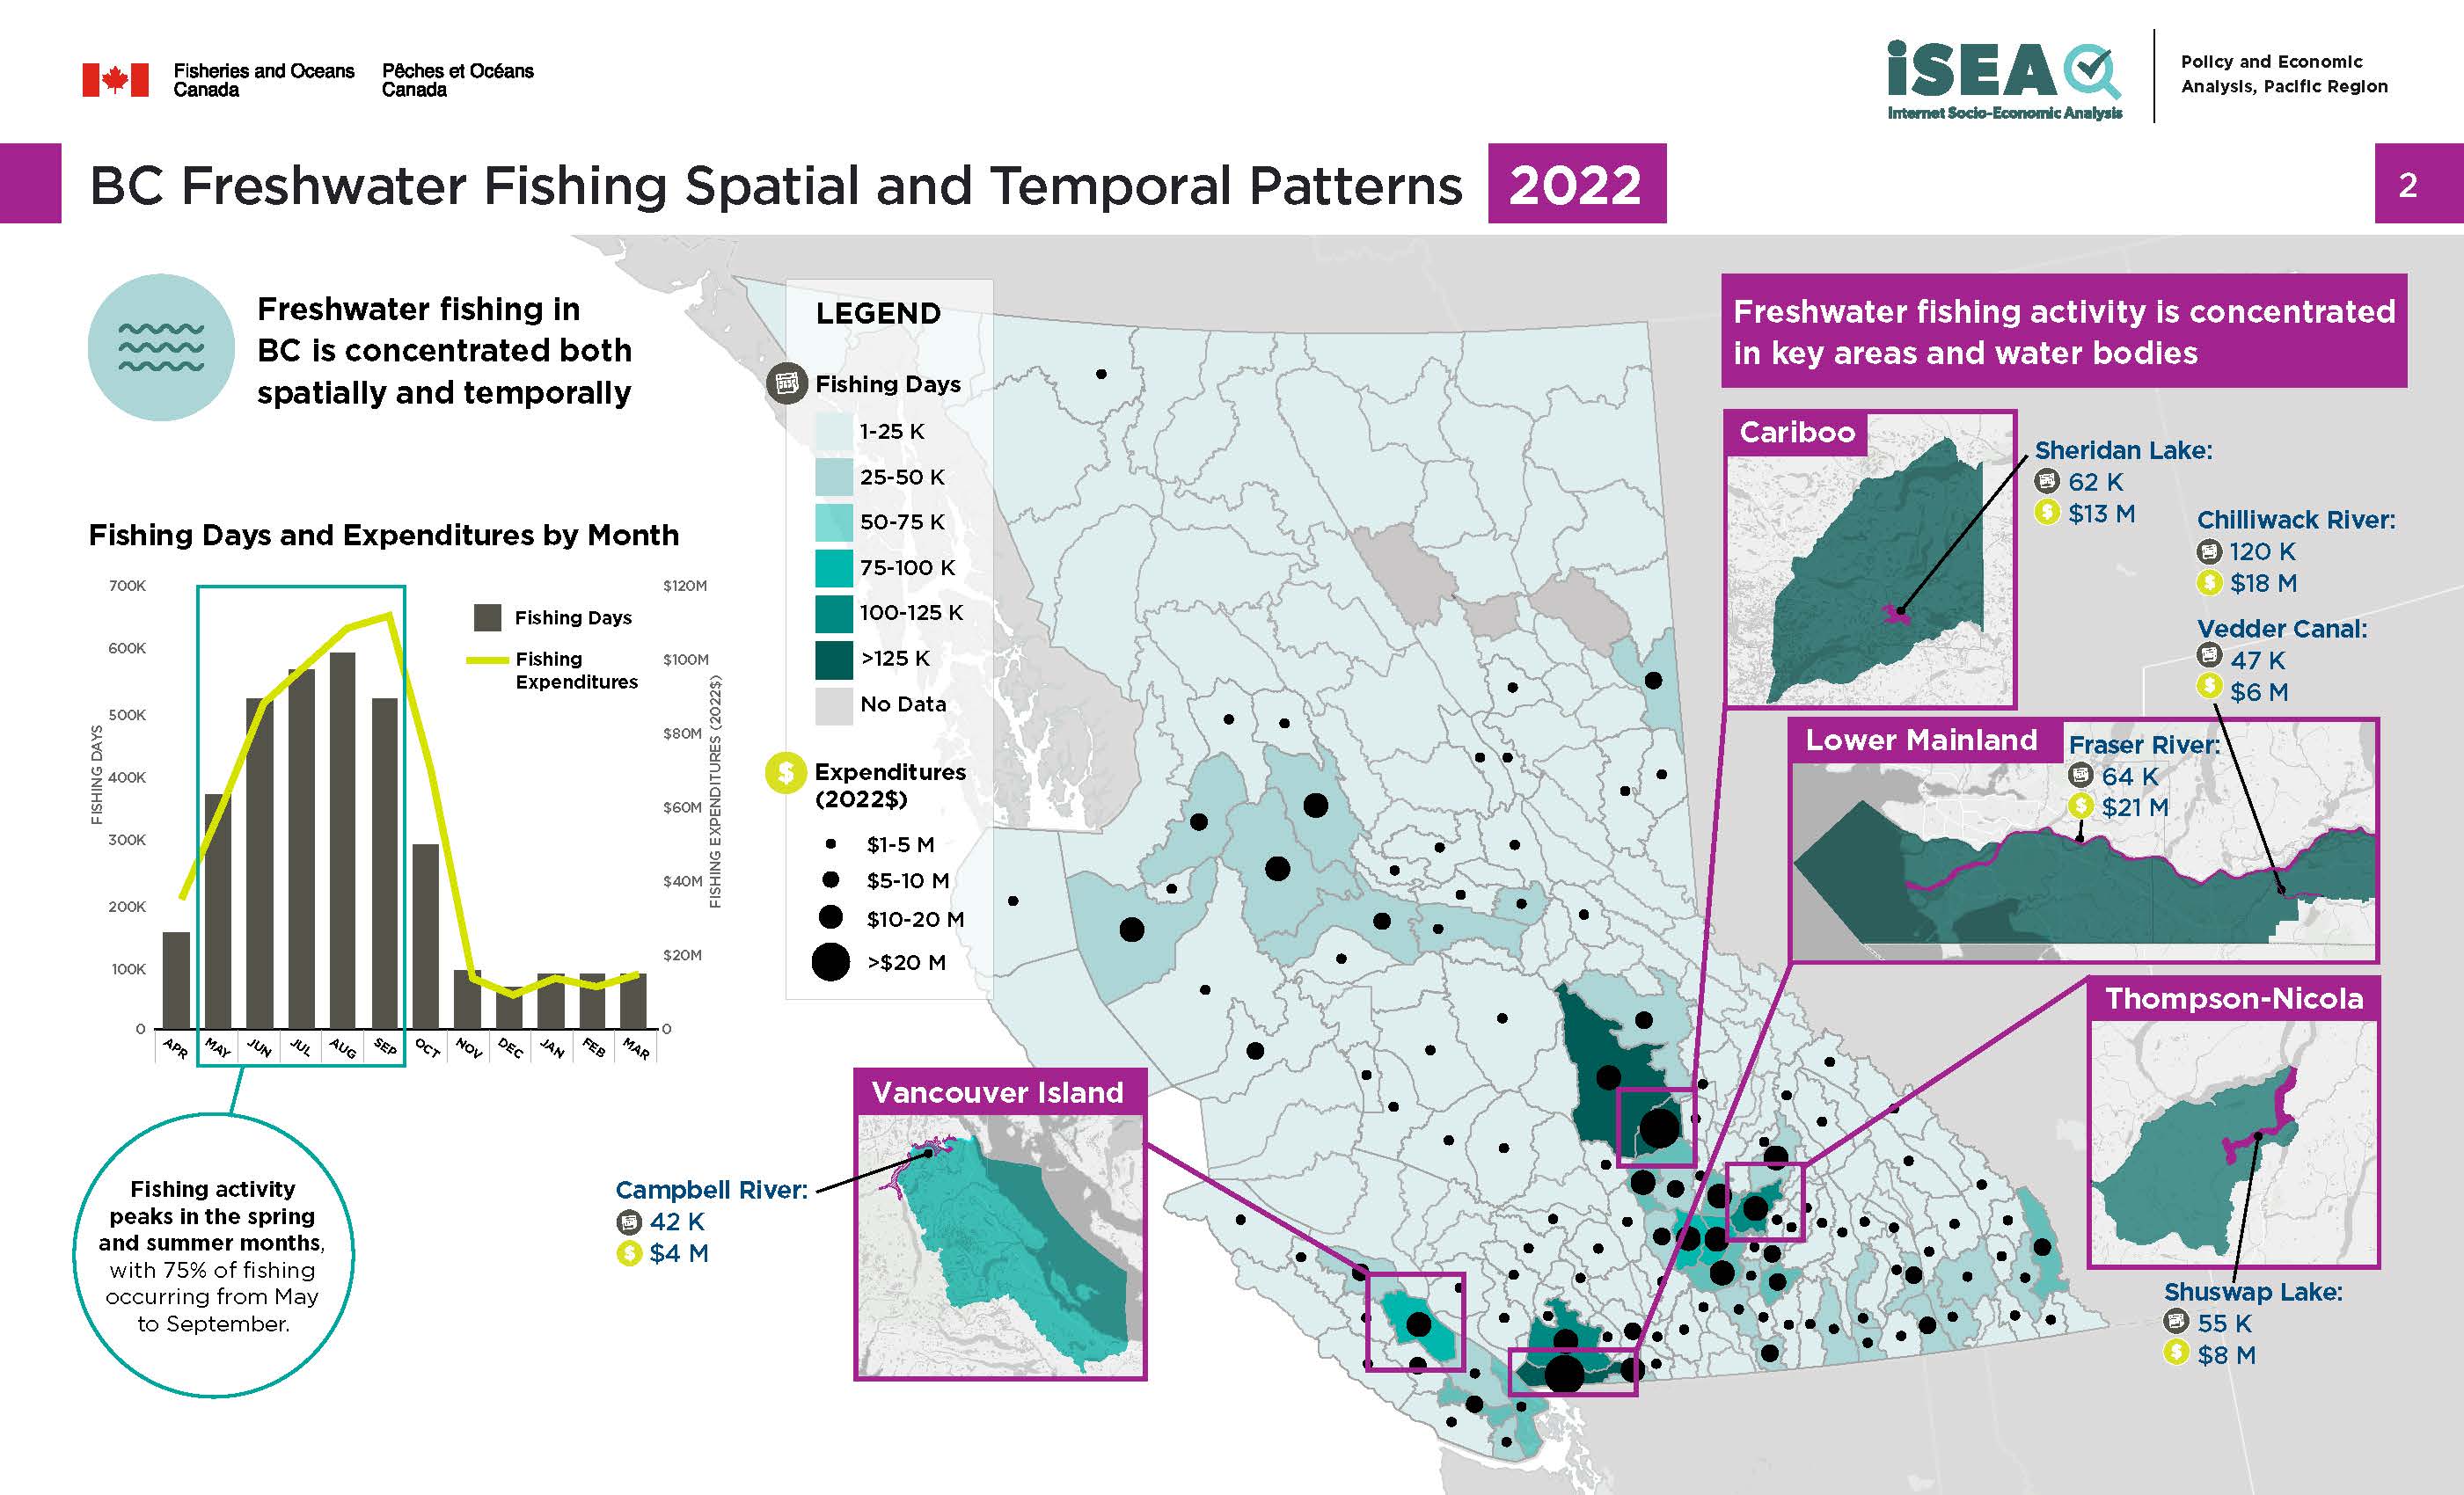 Photo: infographic of BC freshwater fishing spatial and temporal patterns, 2022